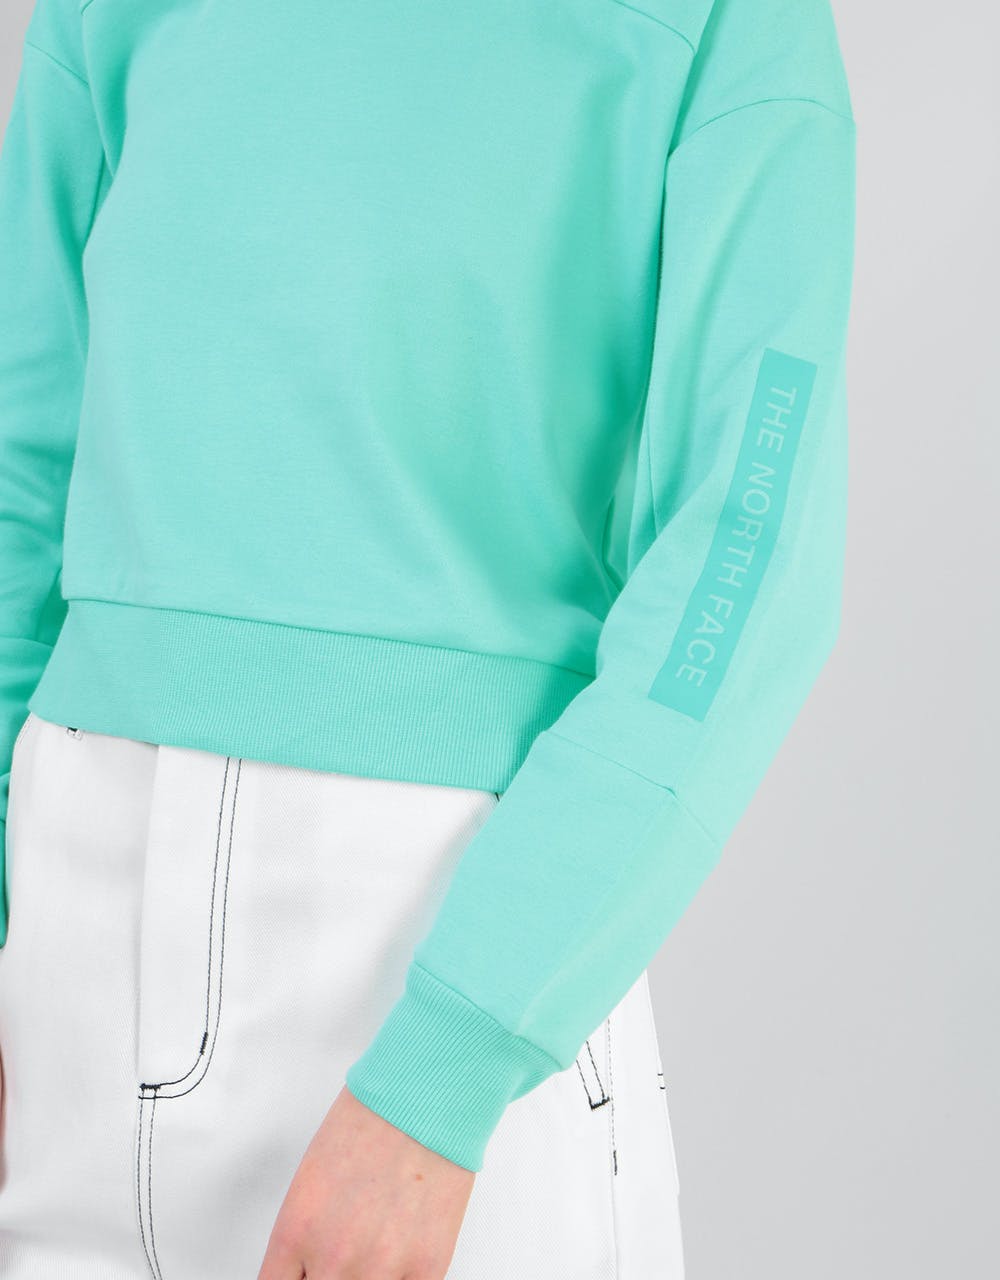 The North Face Womens Light Cropped Sweat - Bermuda Green